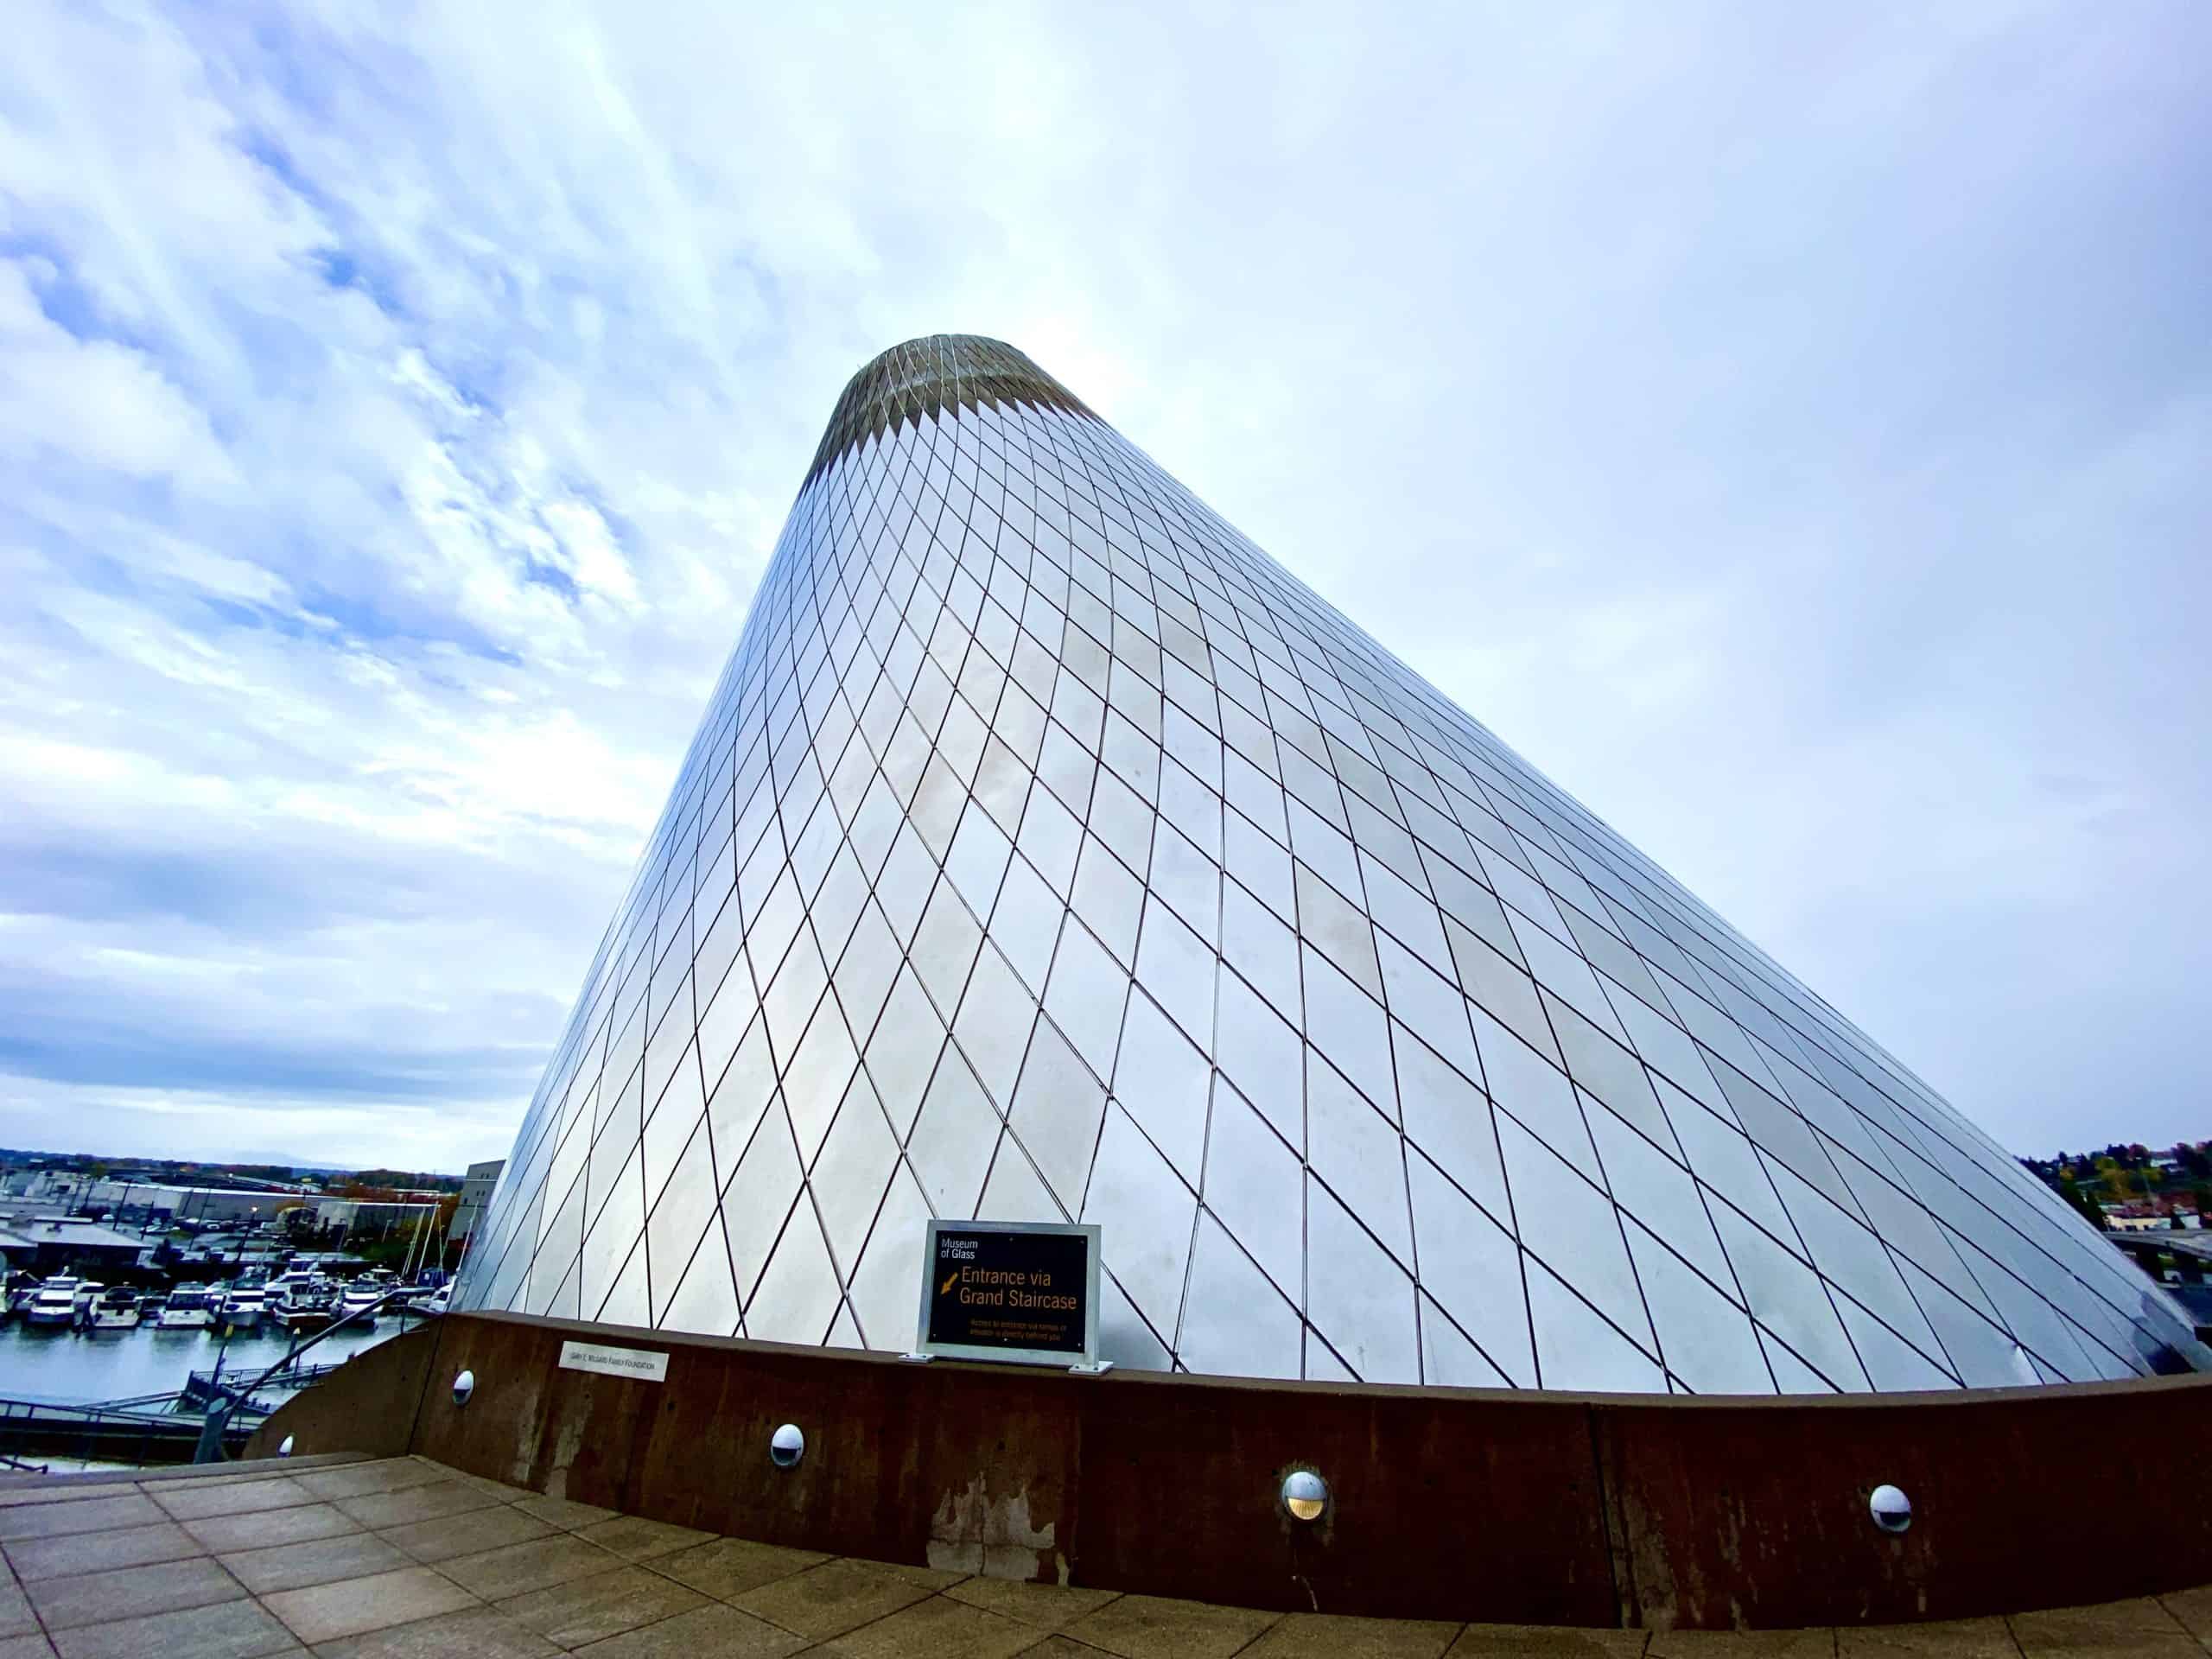 Best things to do in Tacoma Washington - Peggy Cleveland - Museum of Glass